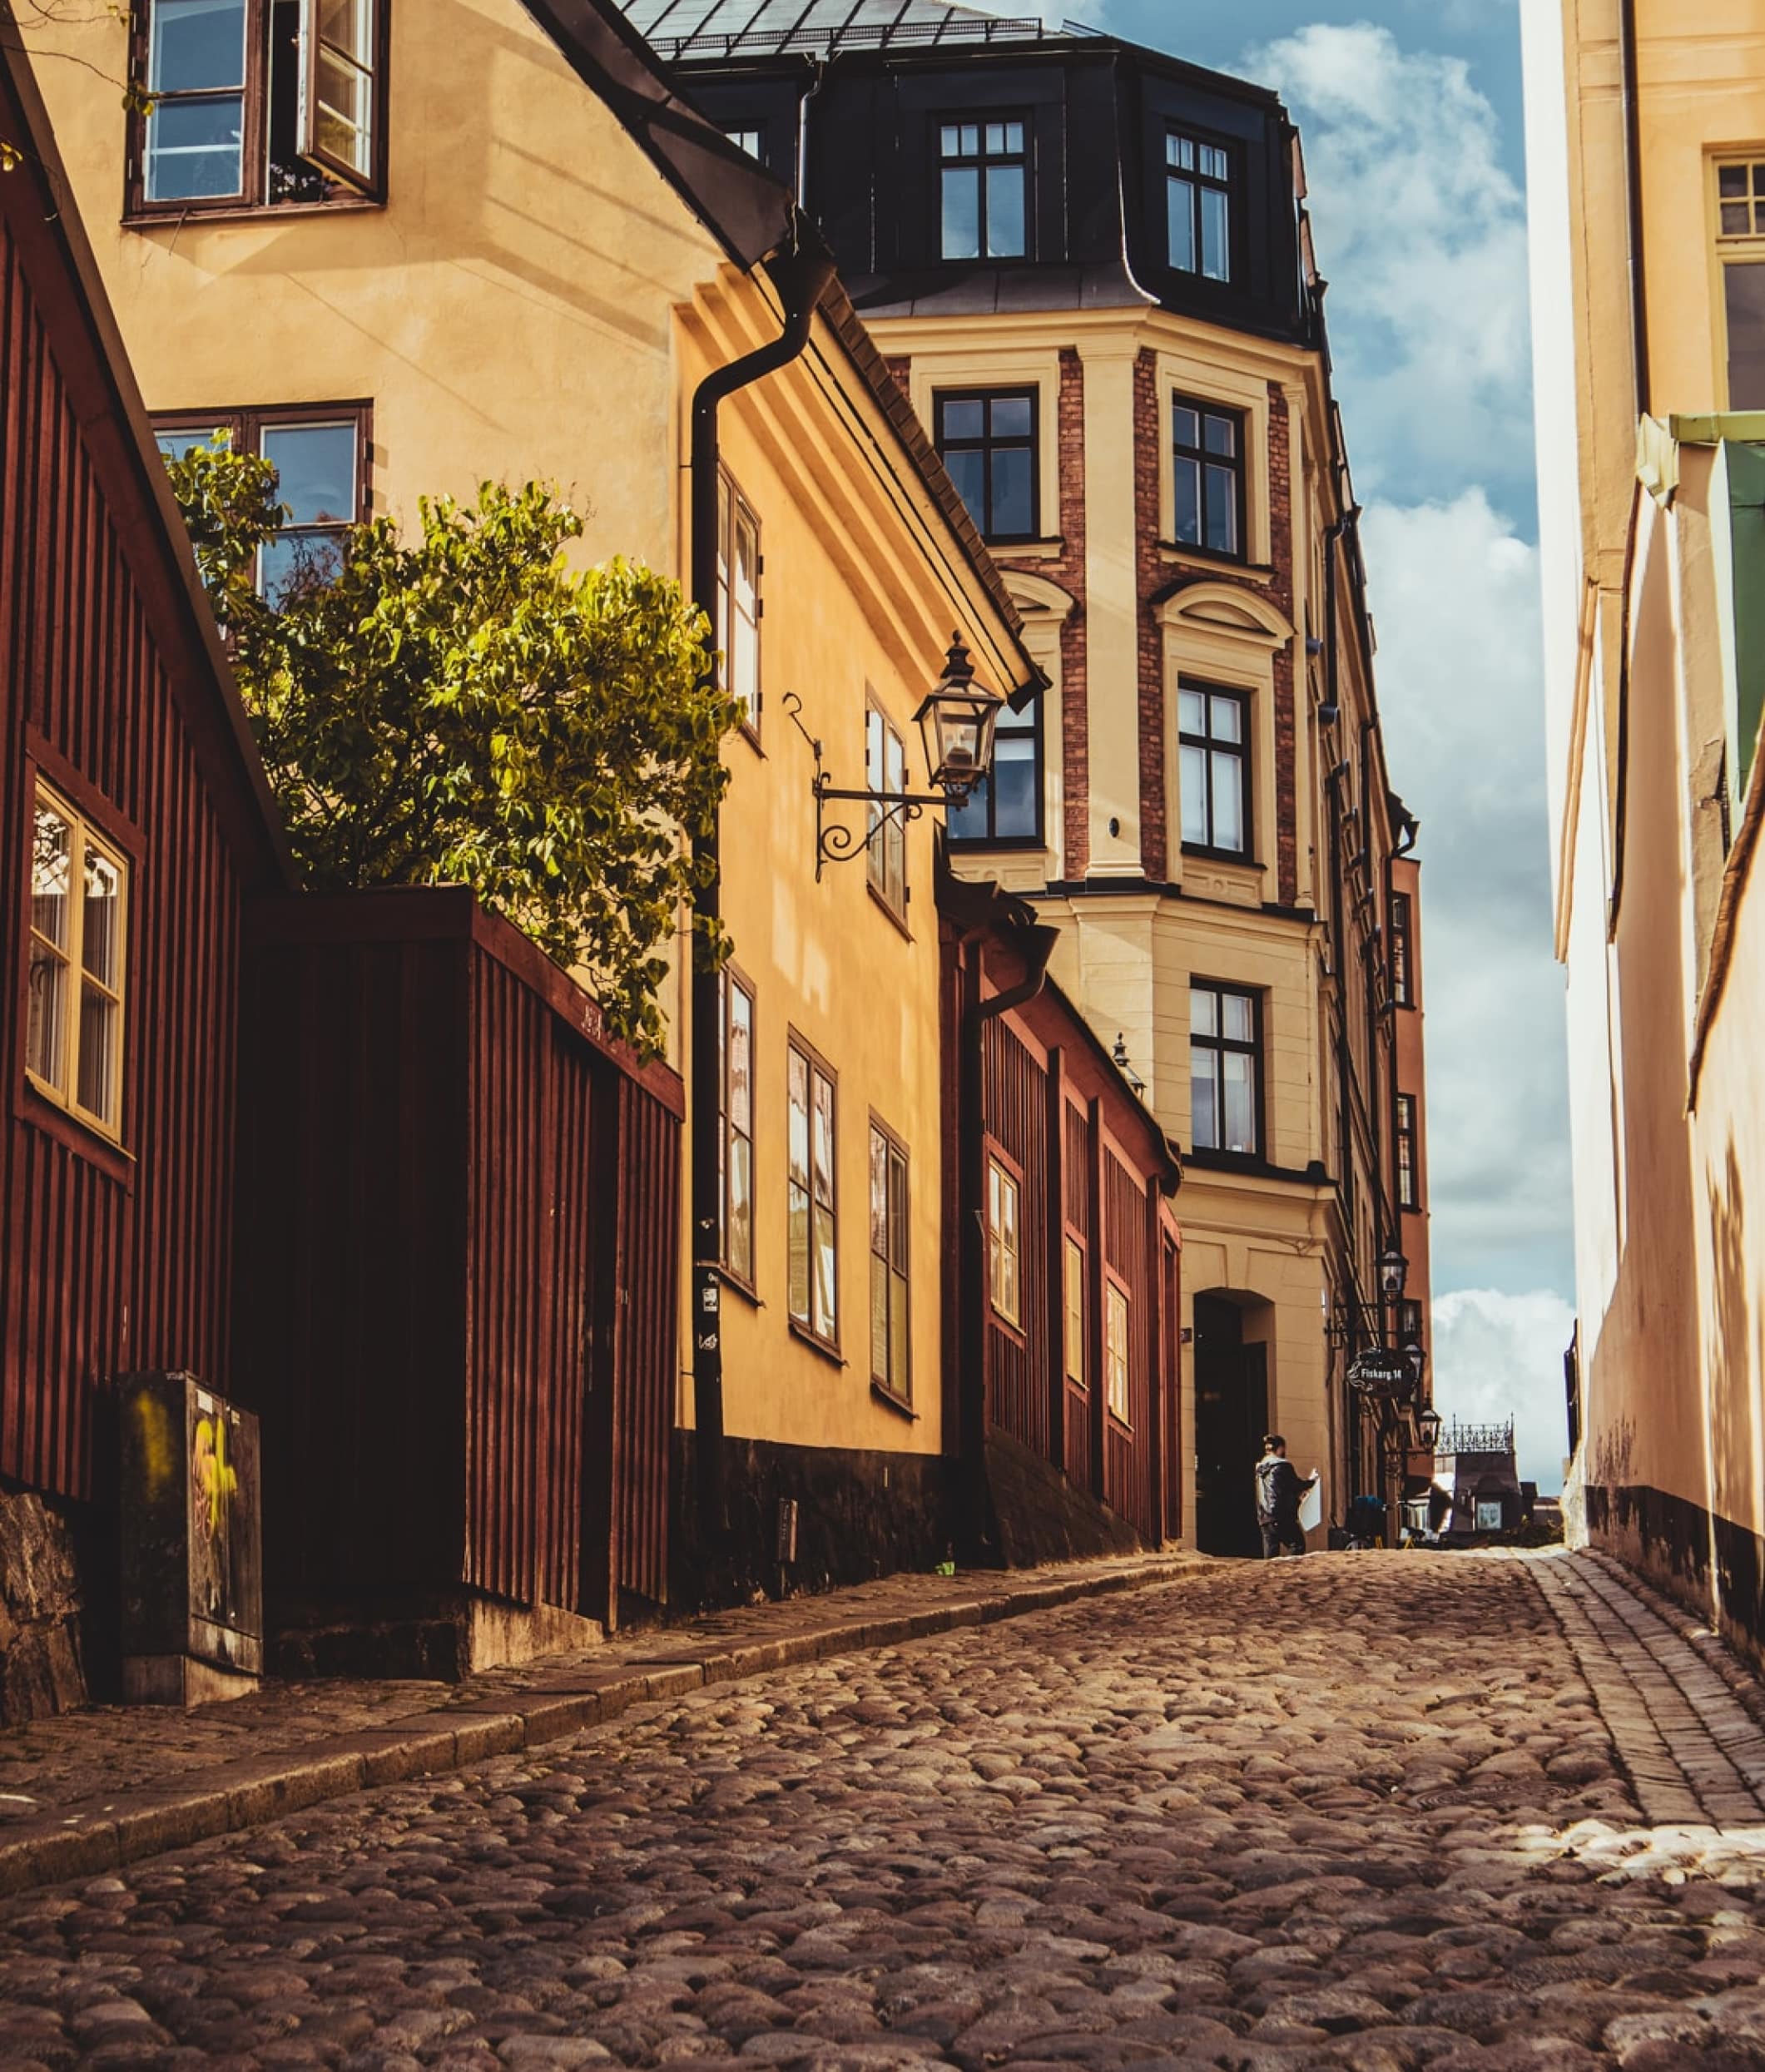 Cobbly streets of Stockholm